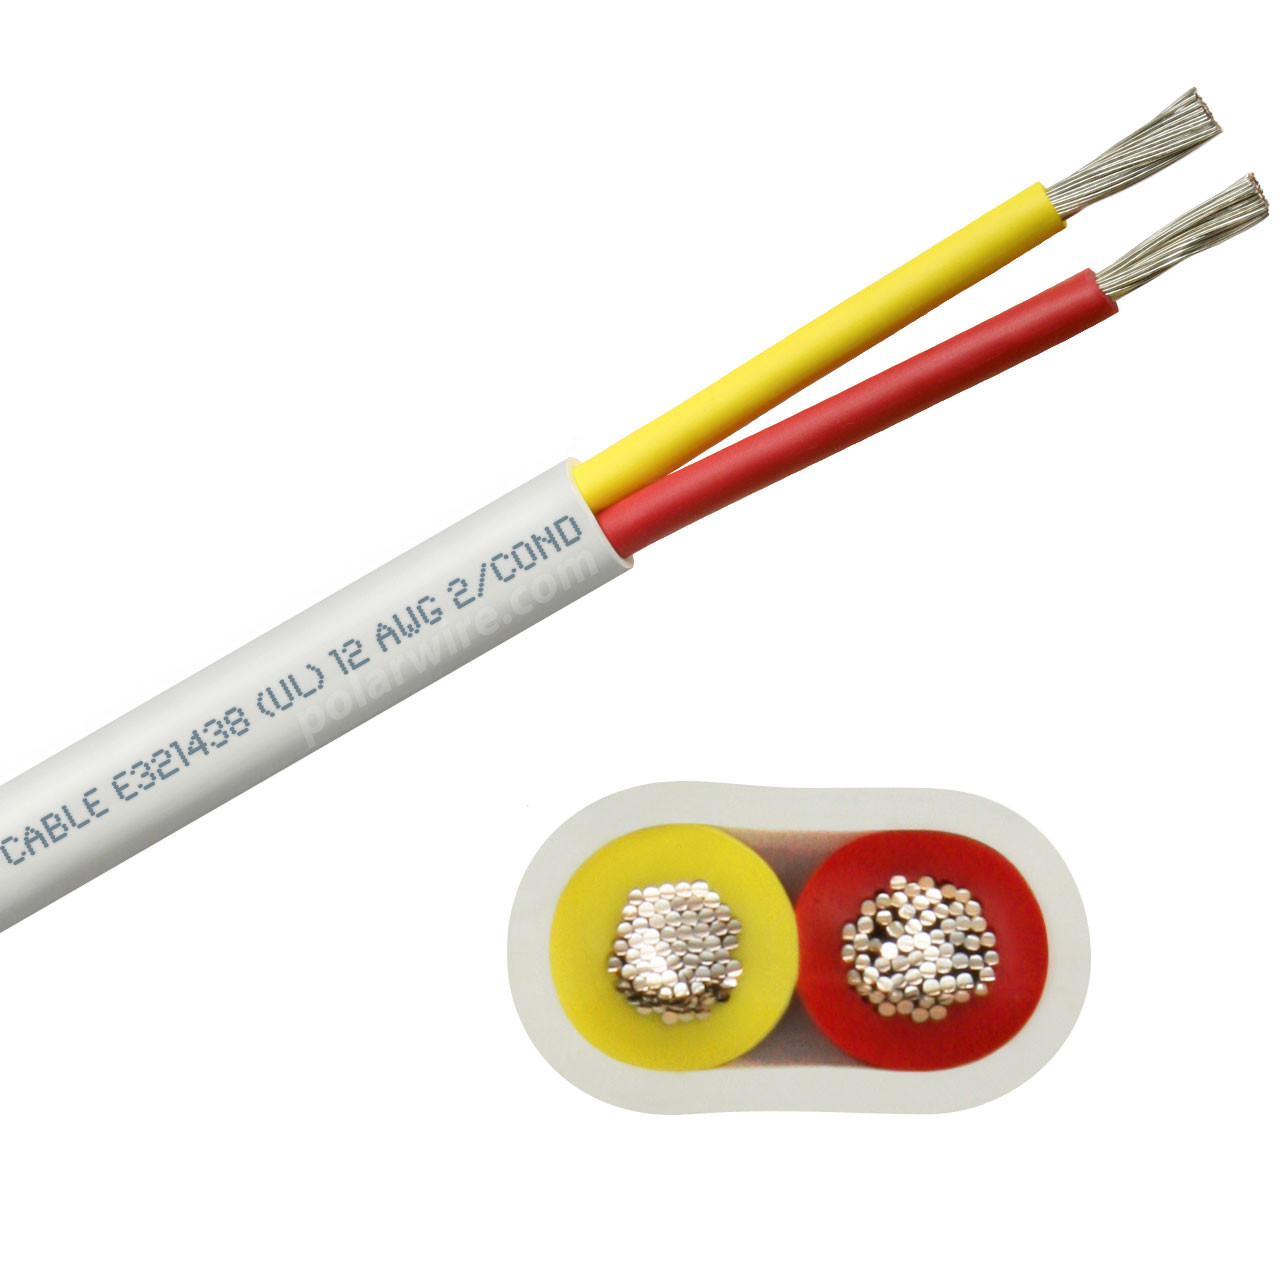 12 AWG flat yellow and red safety dc duplex marine grade tinned copper bc5w2 boat cable features ultra flexible Class K fine copper stranding for flexibility and conductivity, exceeds ABYC standards, UL Listed, CSA Certified